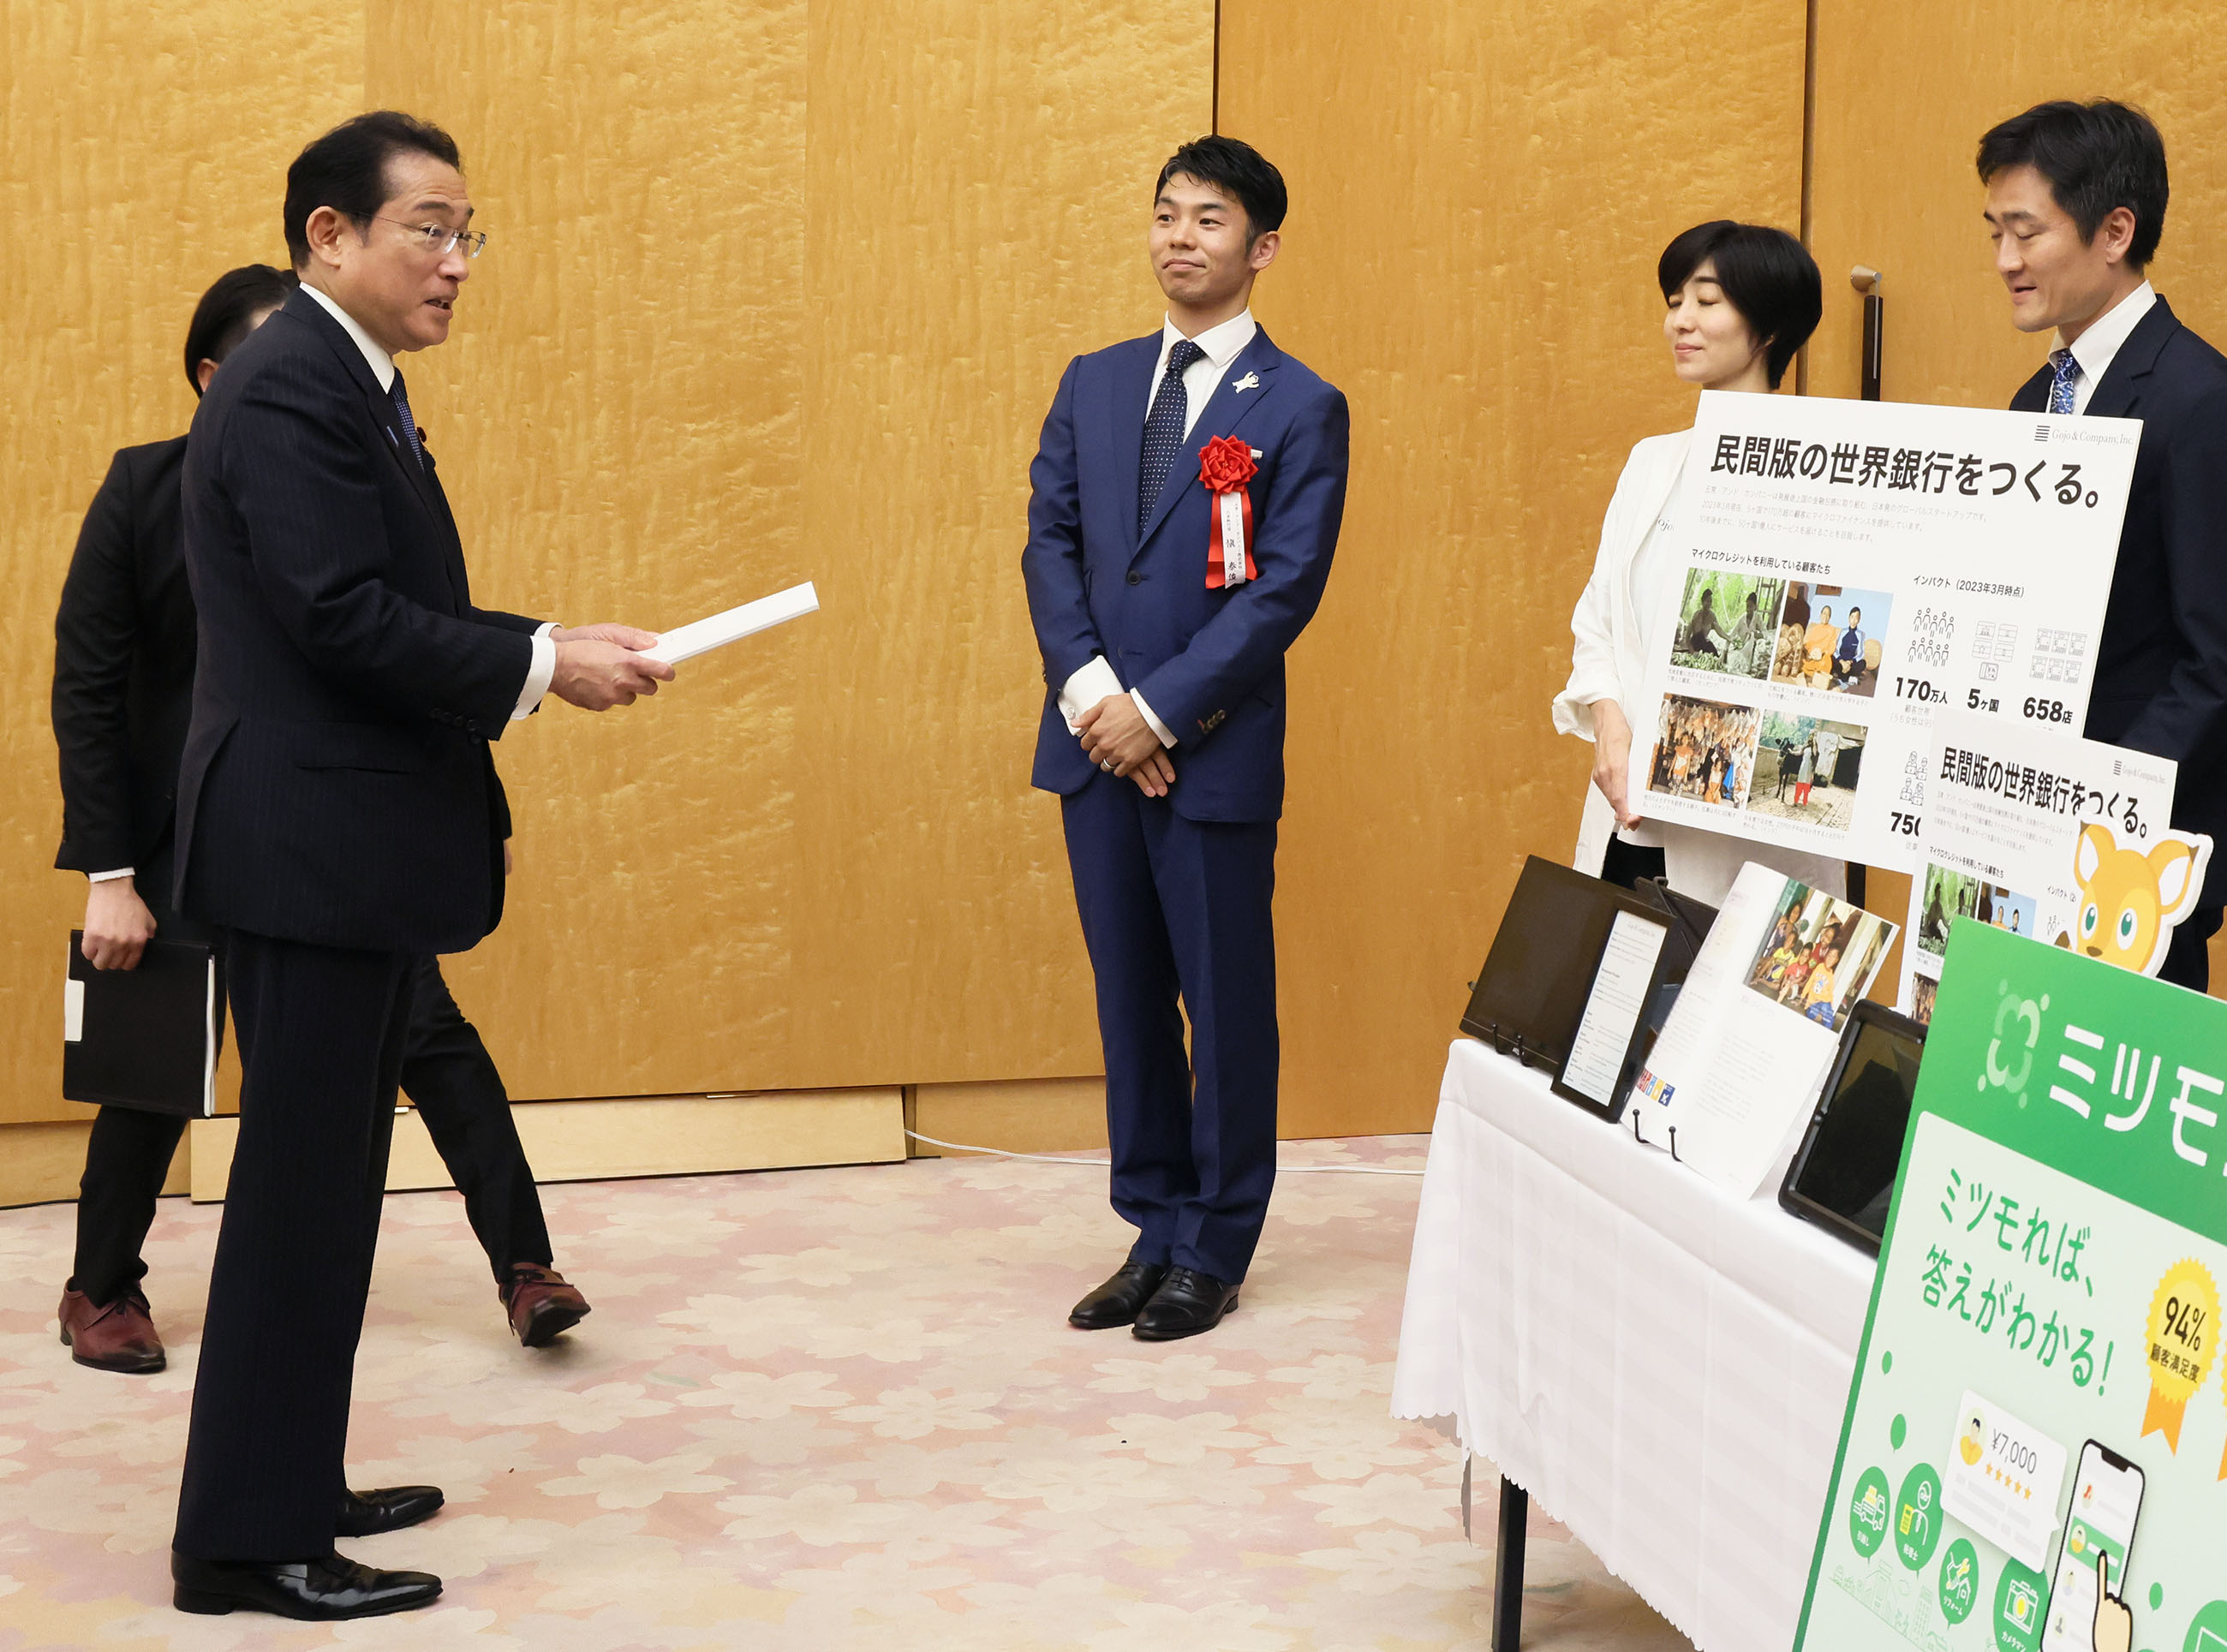 Prime Minister Kishida viewing the exhibition booth of award winners (1)